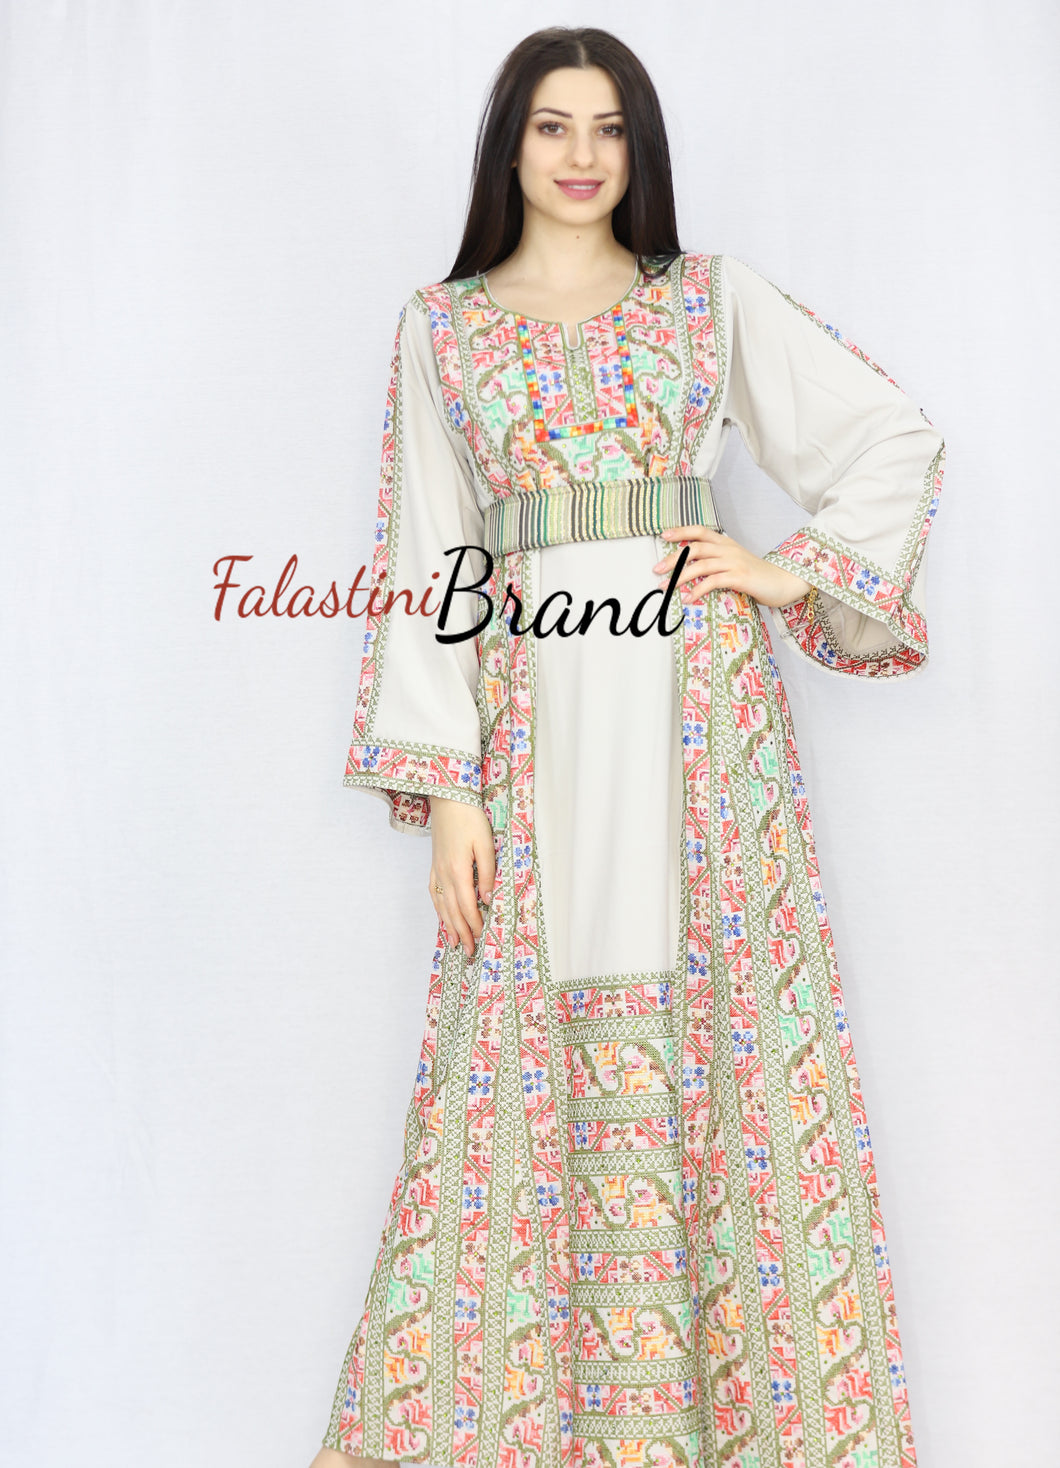 Elegant Cream Color Waves Palestinian Embroidered Dress Thobe